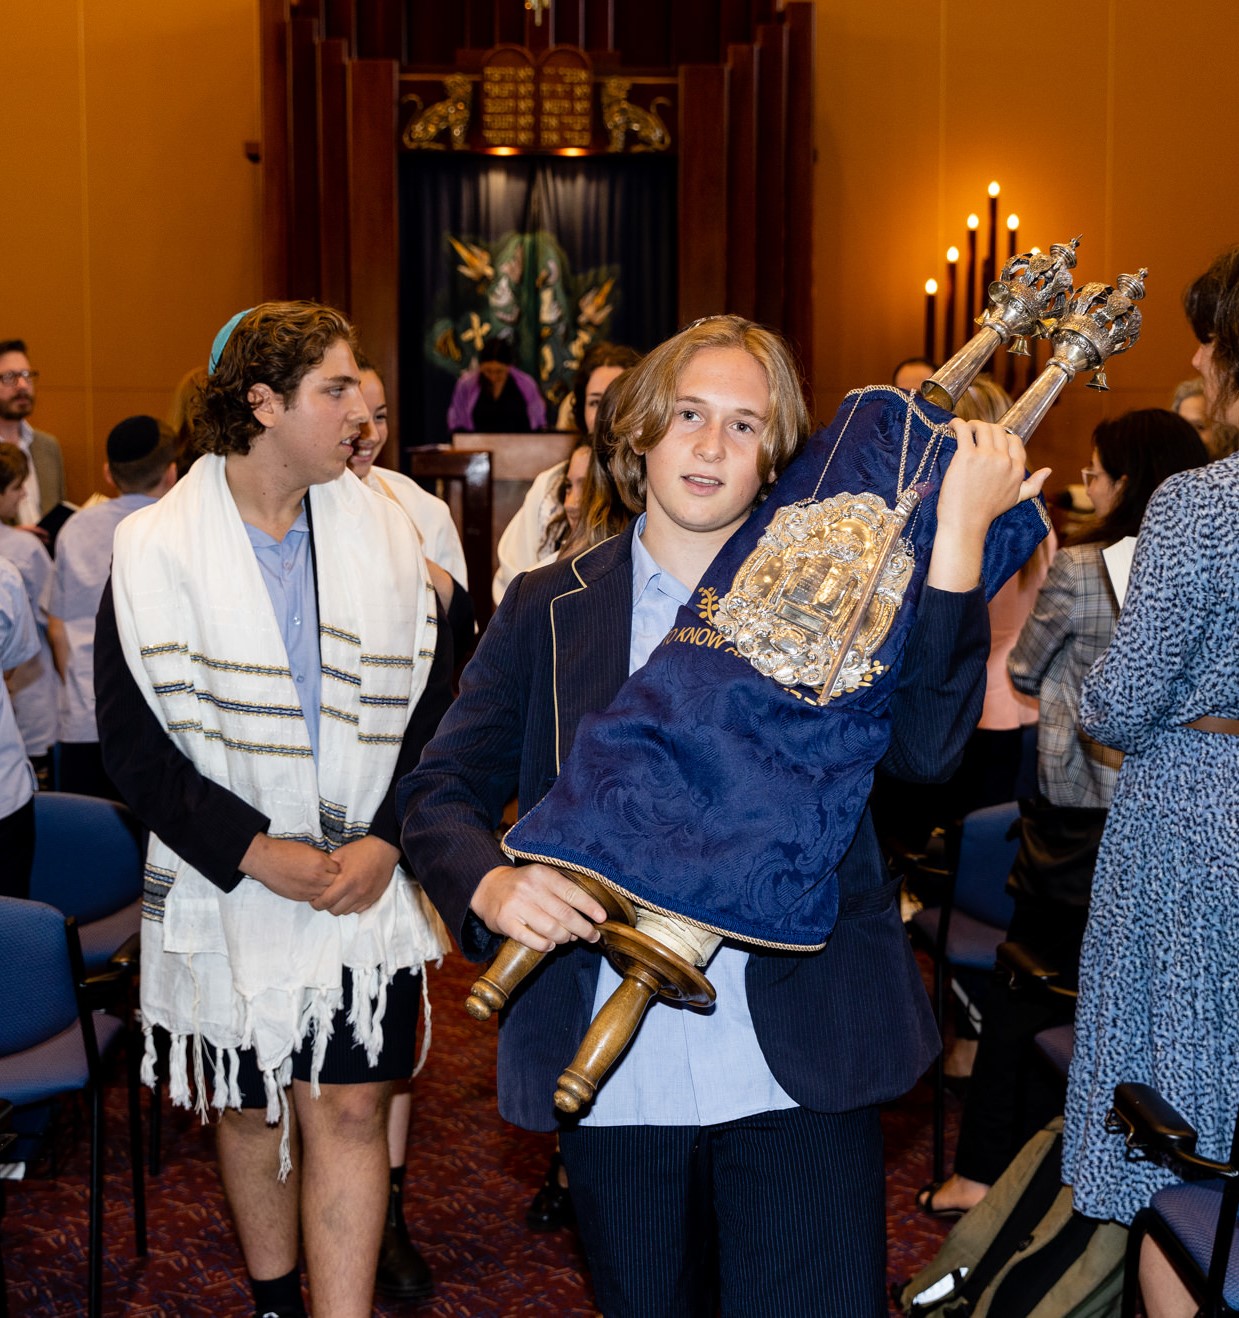 A male student holds a Torah decorated with a blue King David School Torah cover. He is looking at the camera. A male student beside him is wearing a white Talit. He is looking to the side.